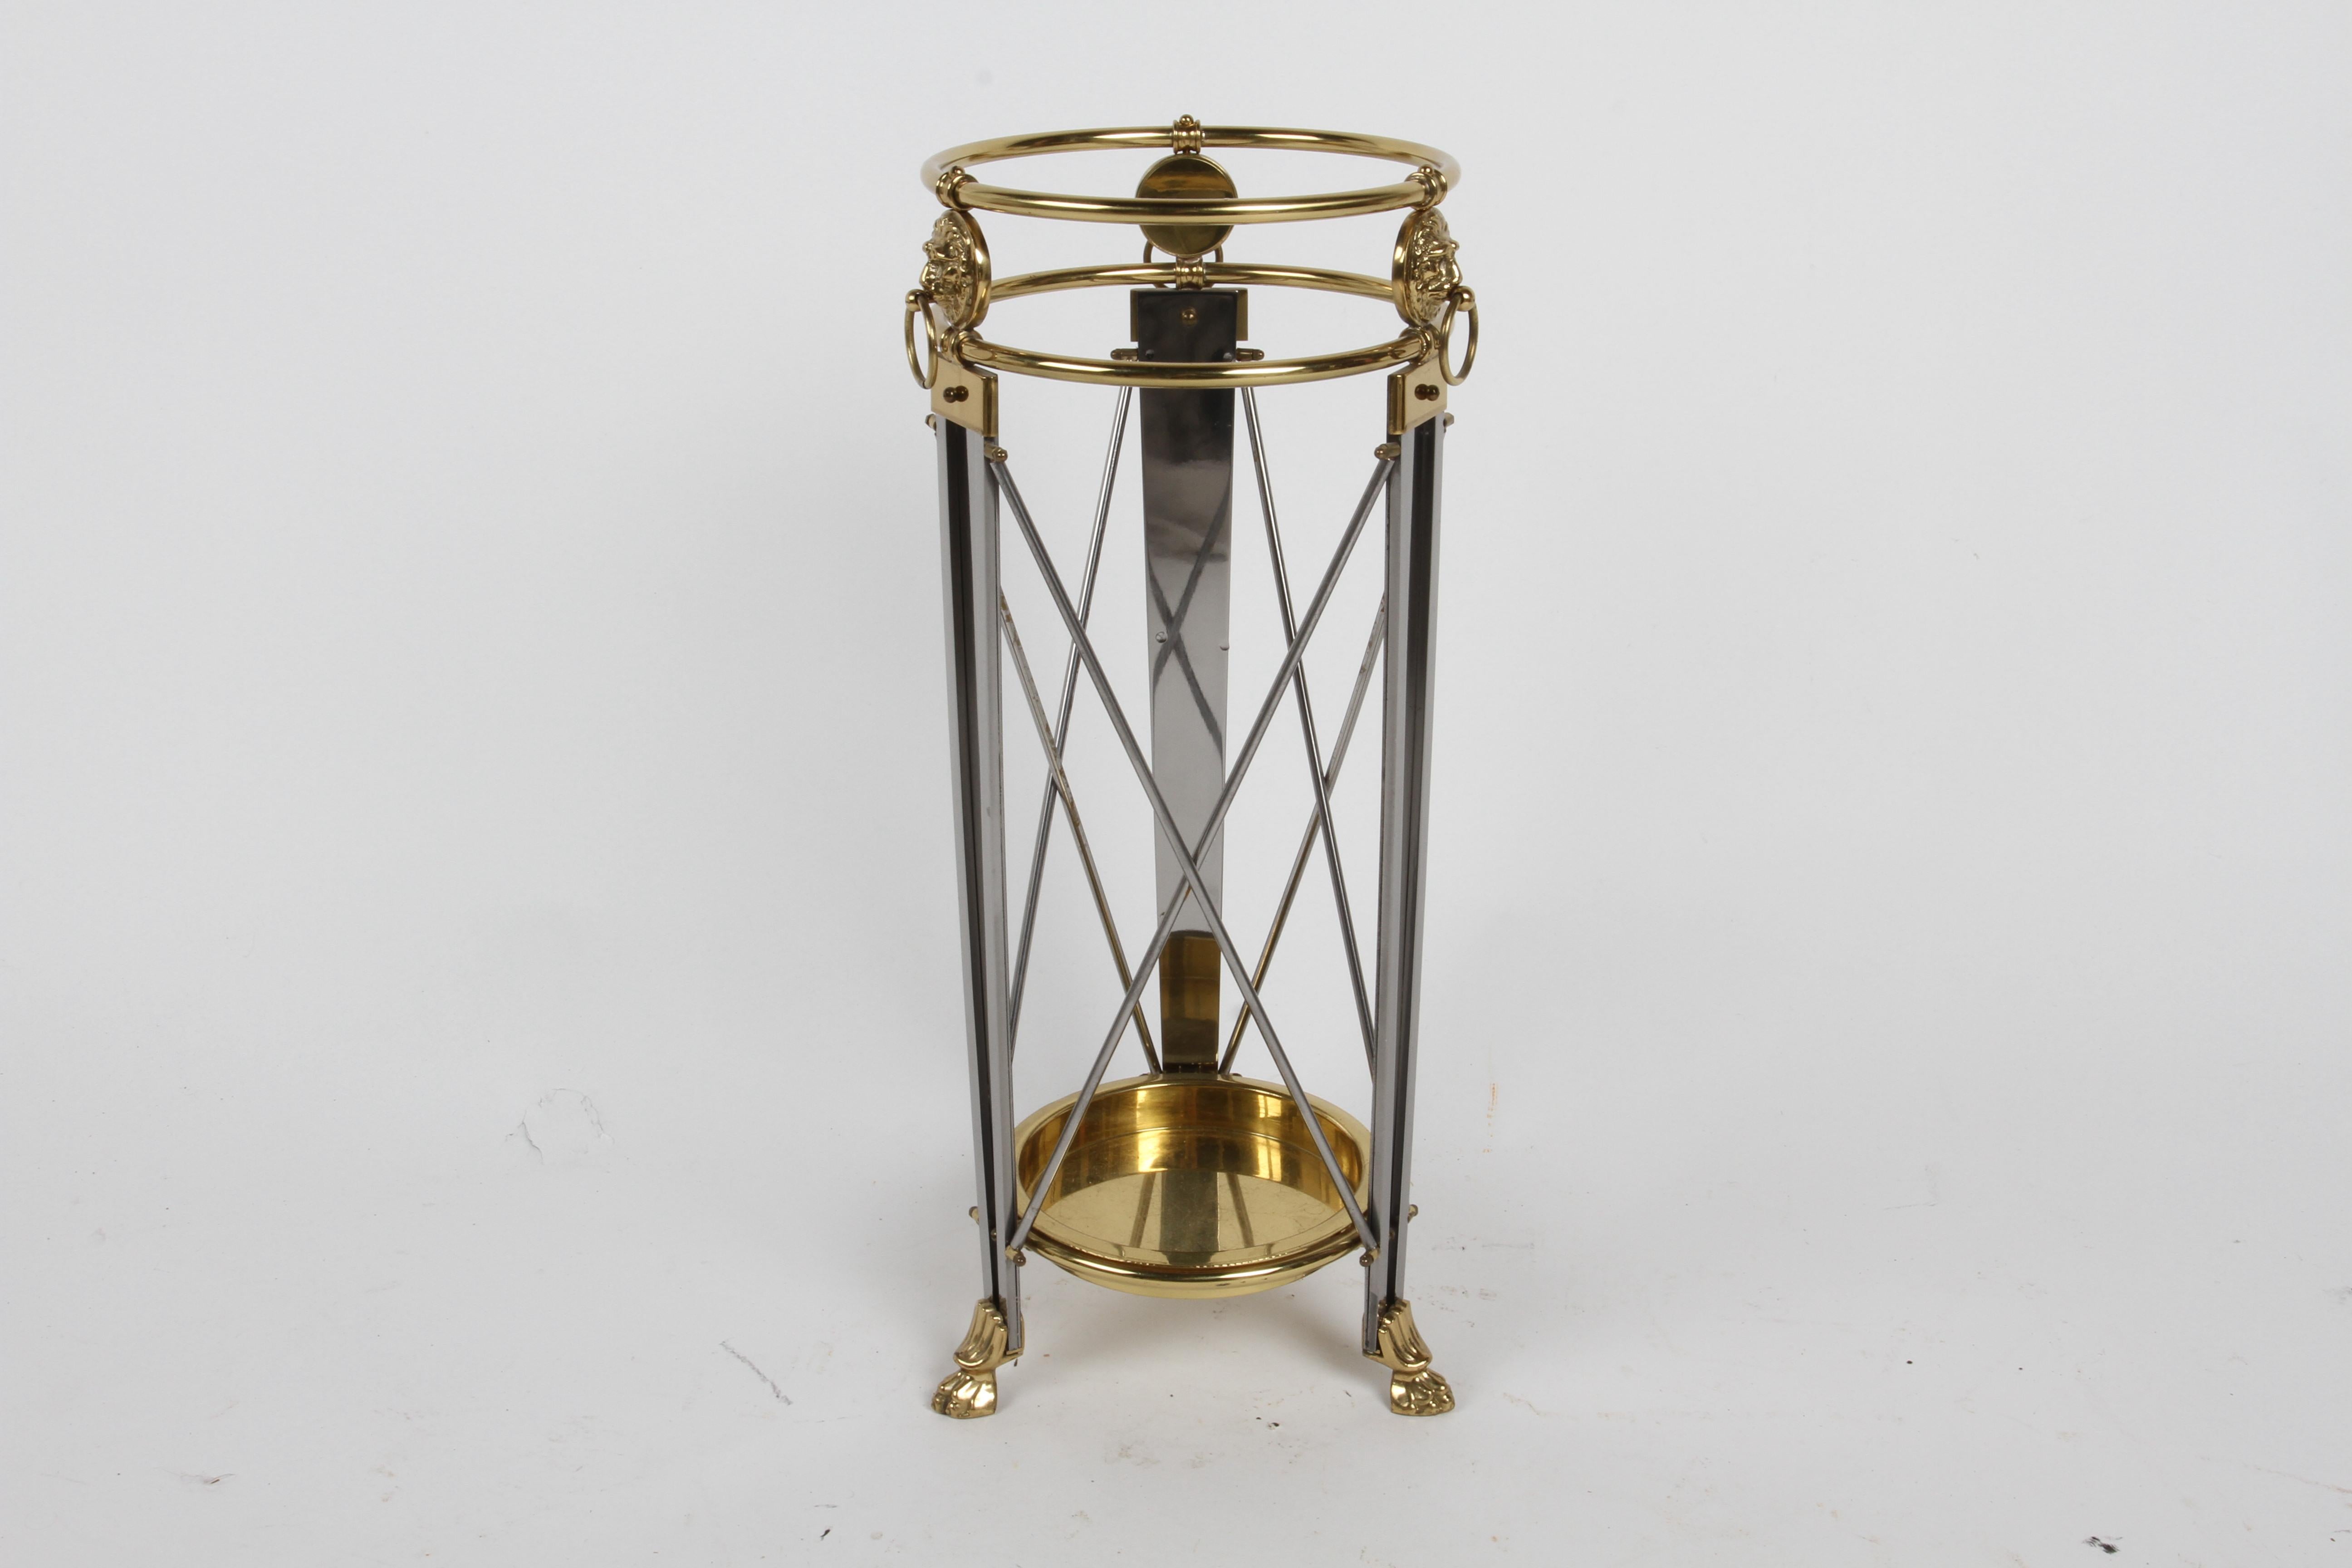 Regency Style Classic Form Umbrella Stand with Lion's Heads in Stainless & Brass In Good Condition For Sale In St. Louis, MO